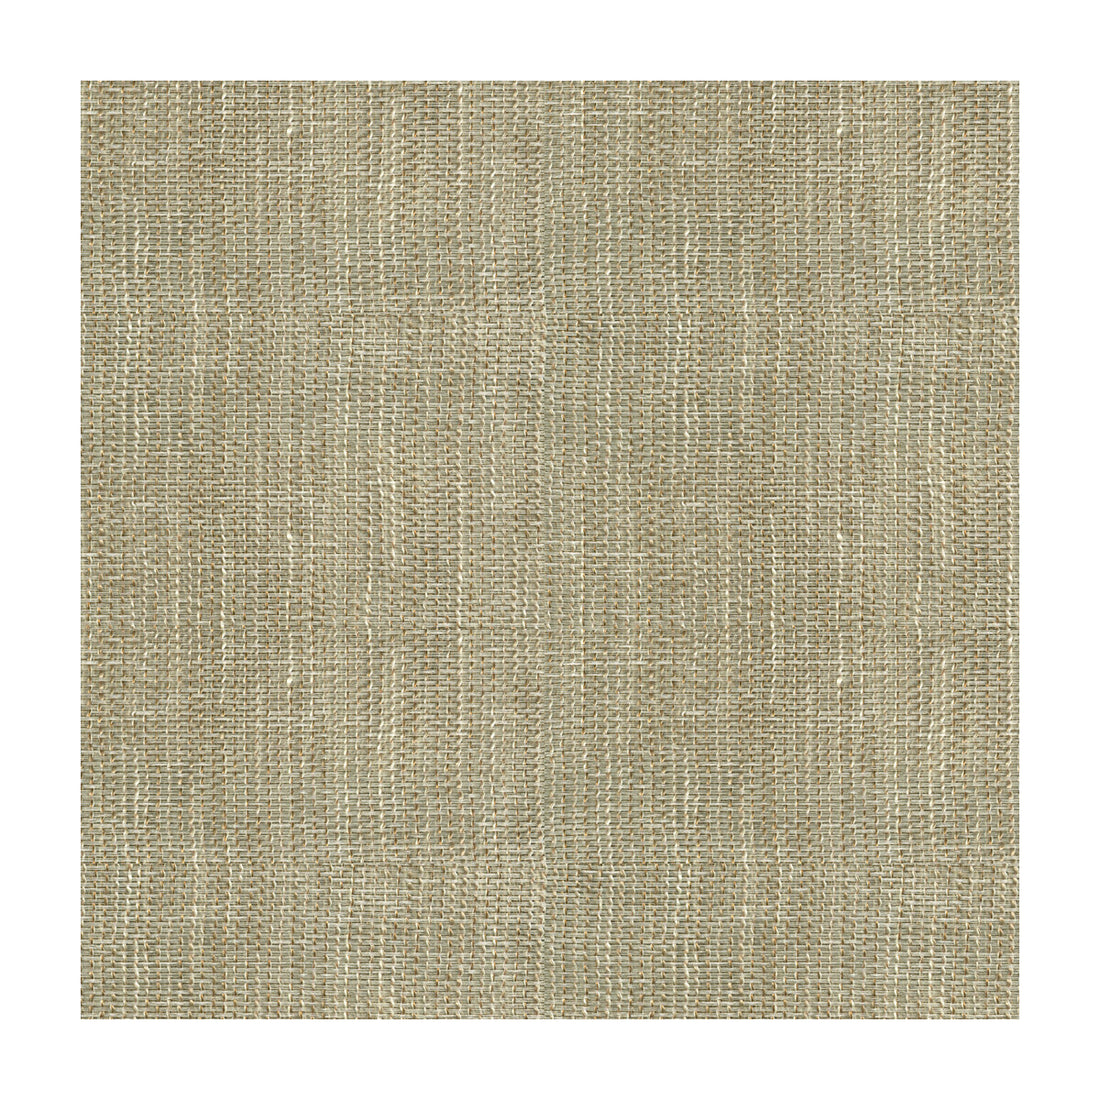 Kravet Contract fabric in 4145-16 color - pattern 4145.16.0 - by Kravet Contract